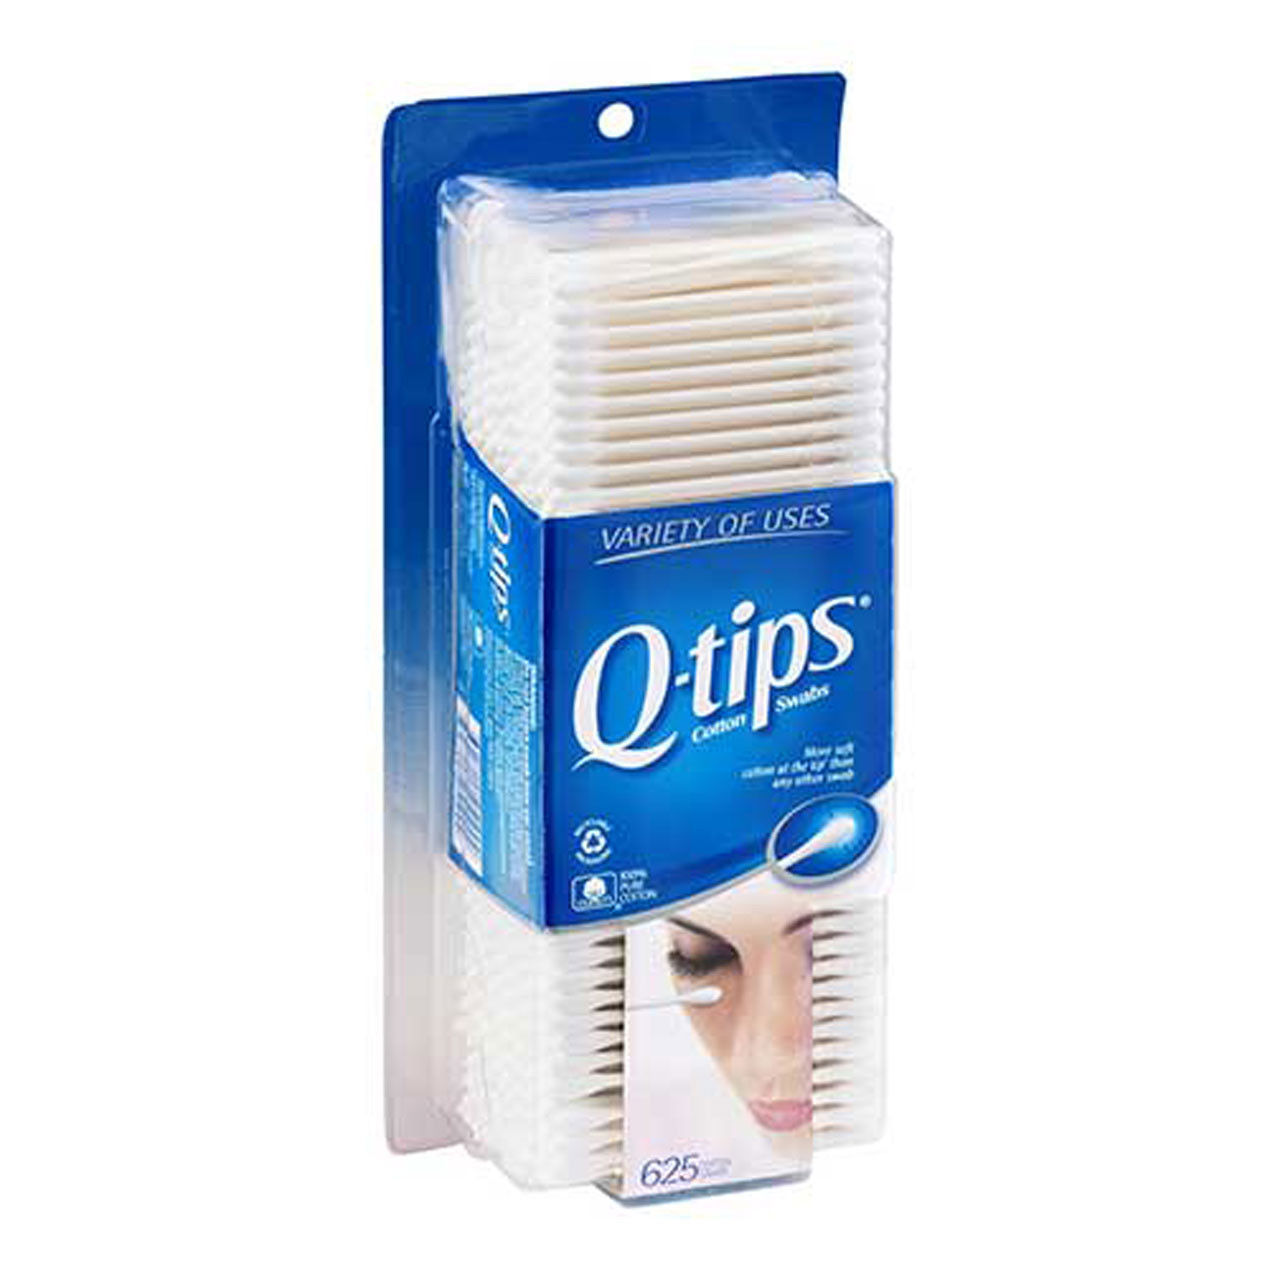 What features do bulk q tips made of 100% cotton have?